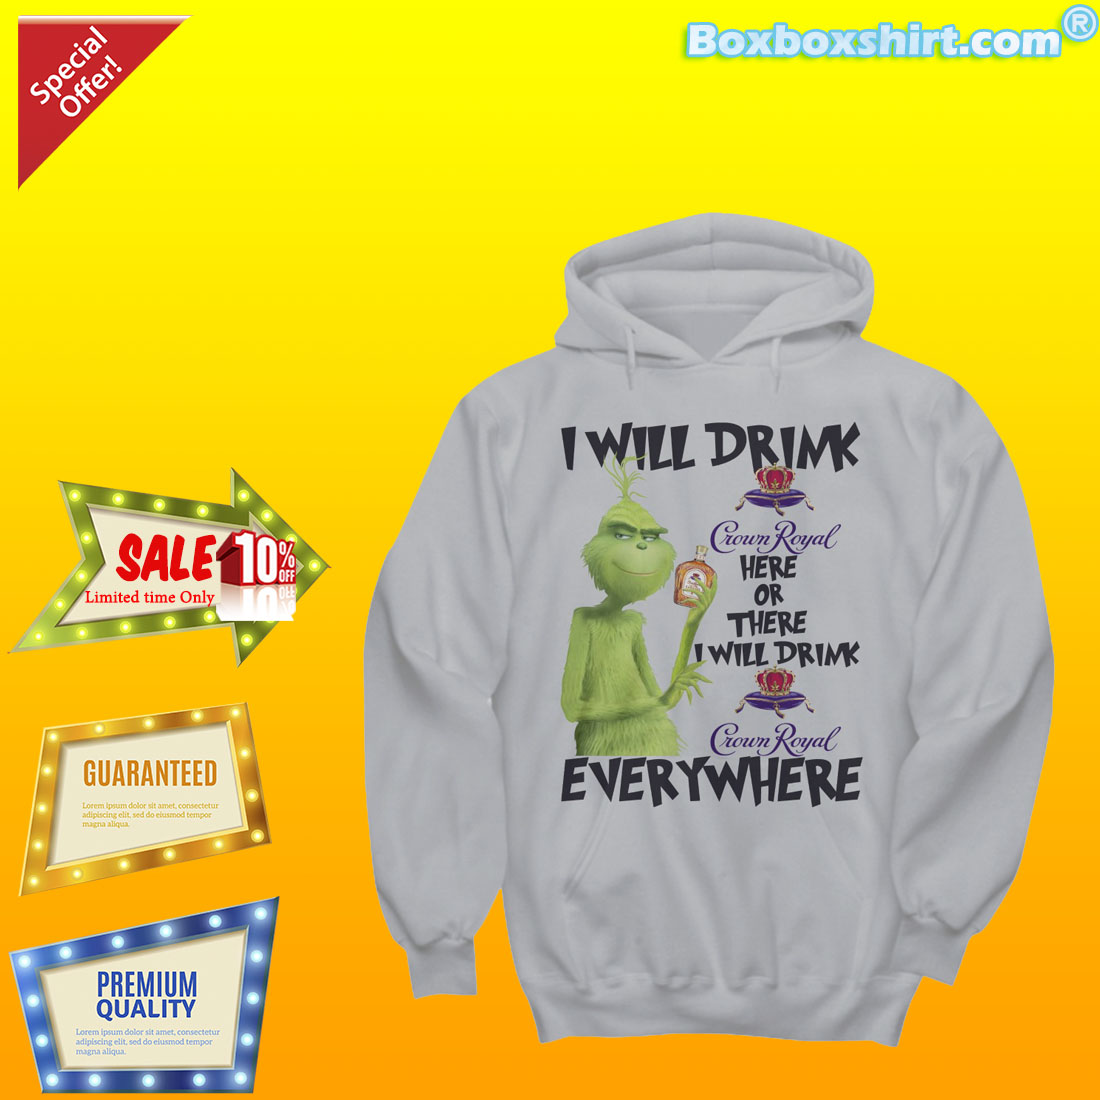 Grinch I will drink Crown Royal here there everywhere shirt